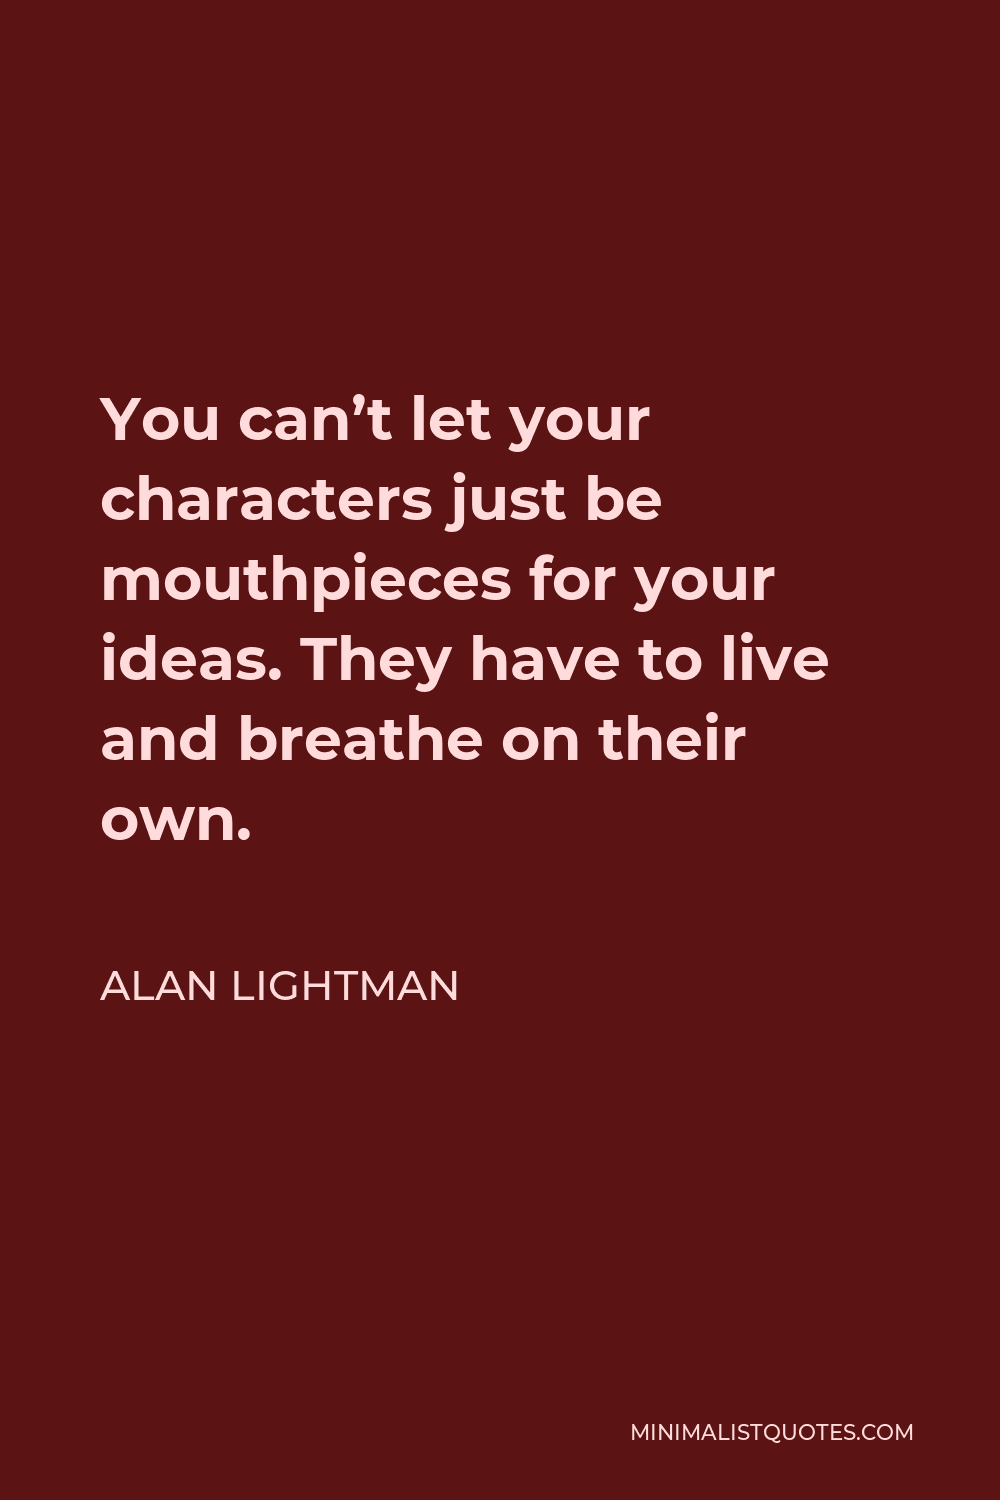 Alan Lightman Quote - You can’t let your characters just be mouthpieces for your ideas. They have to live and breathe on their own.